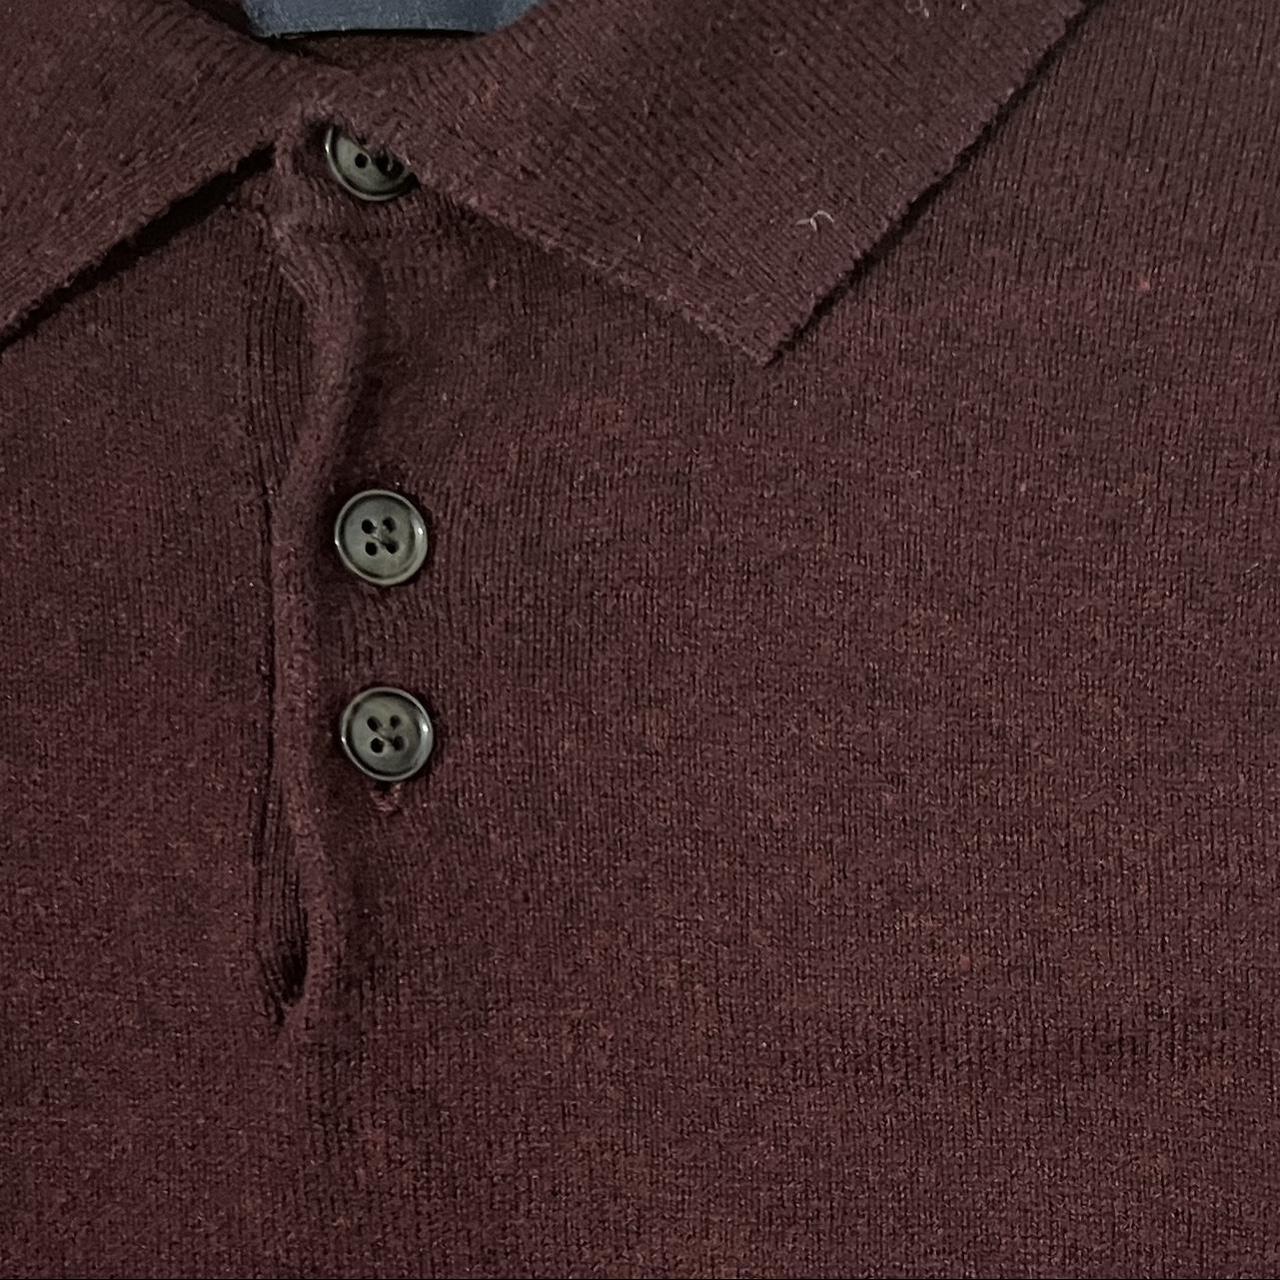 maroon collared button up shirt, great for fall... - Depop